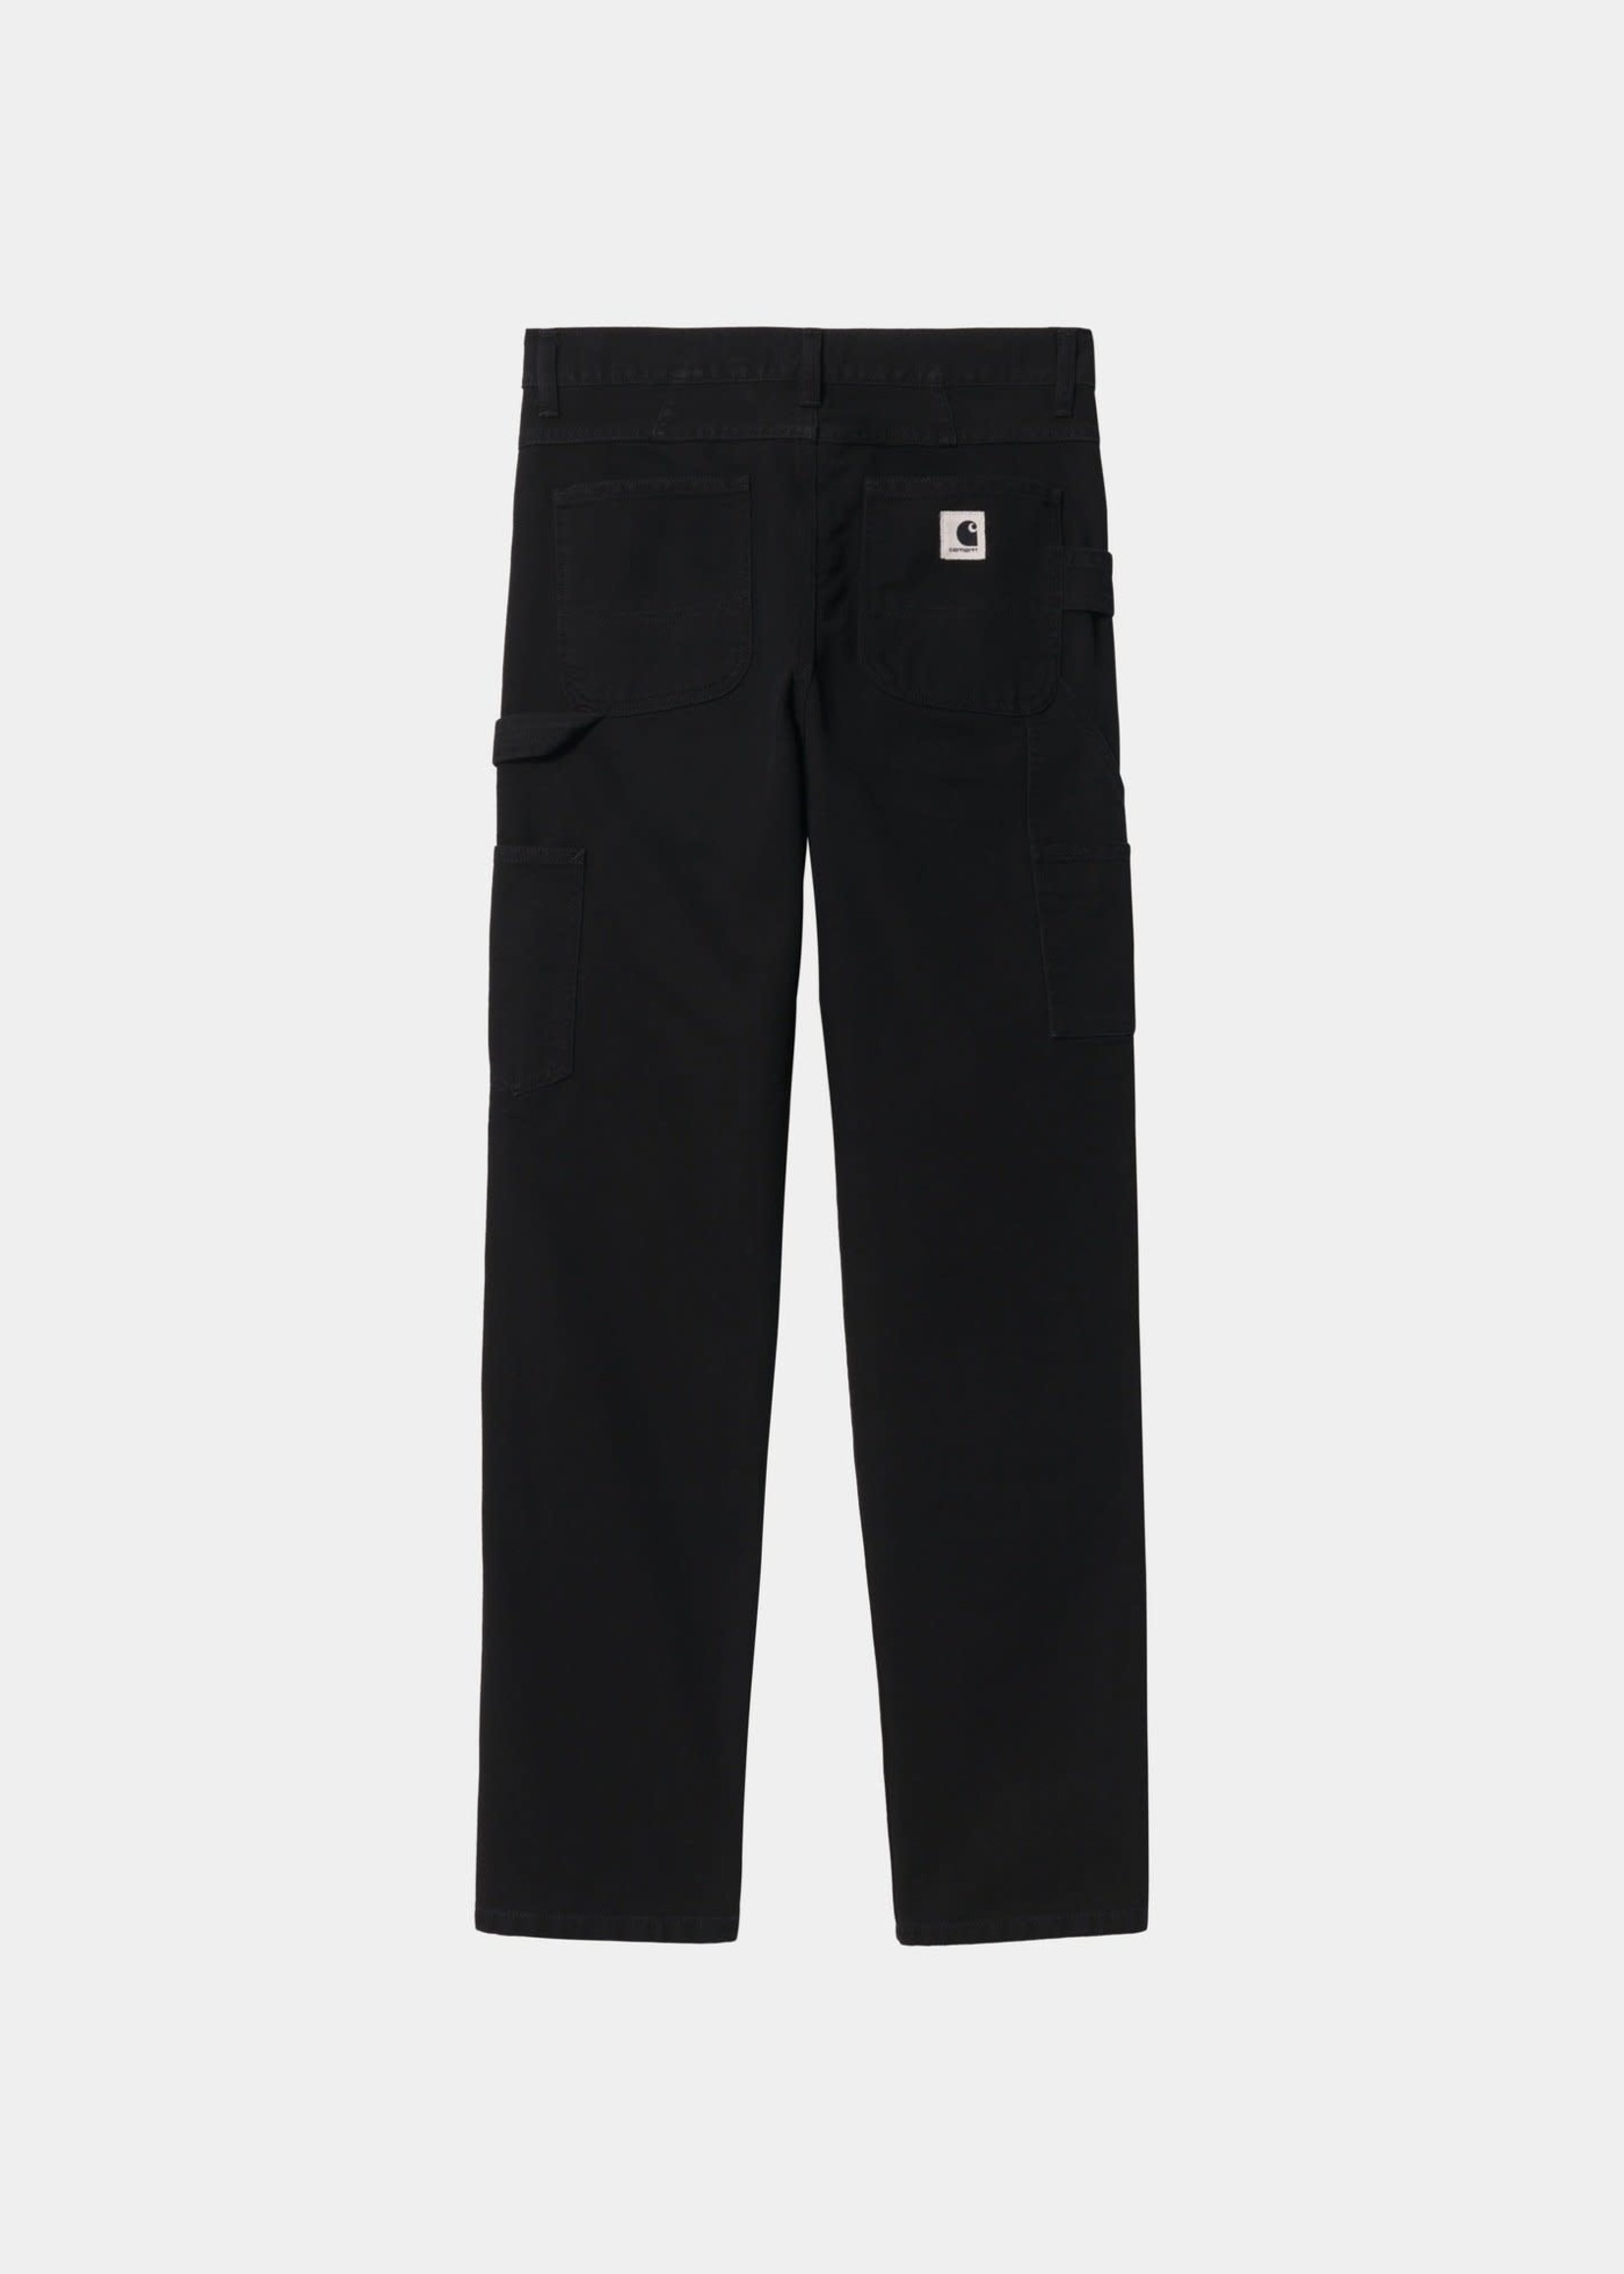 Carhartt Work In Progress Double Knee Pant in Black Aged Canvas